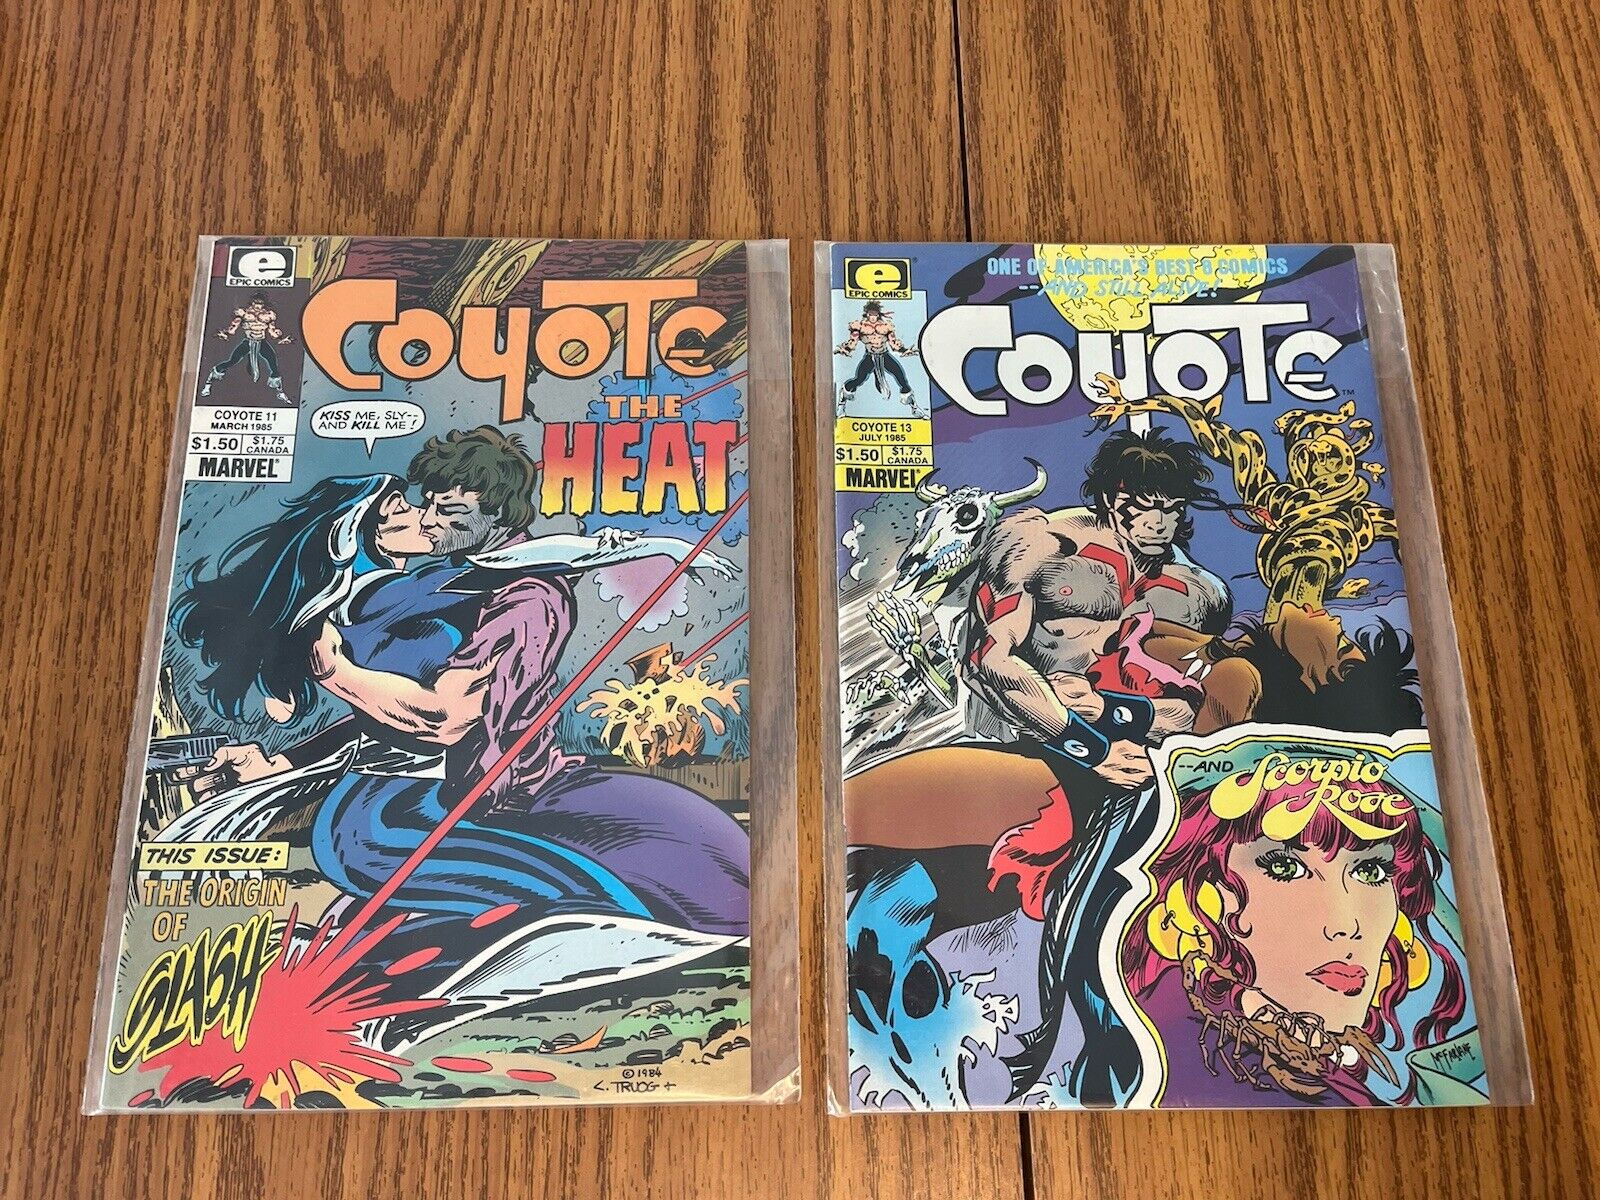 Coyote 11 & 13 Lot Todd McFarlane's First published art